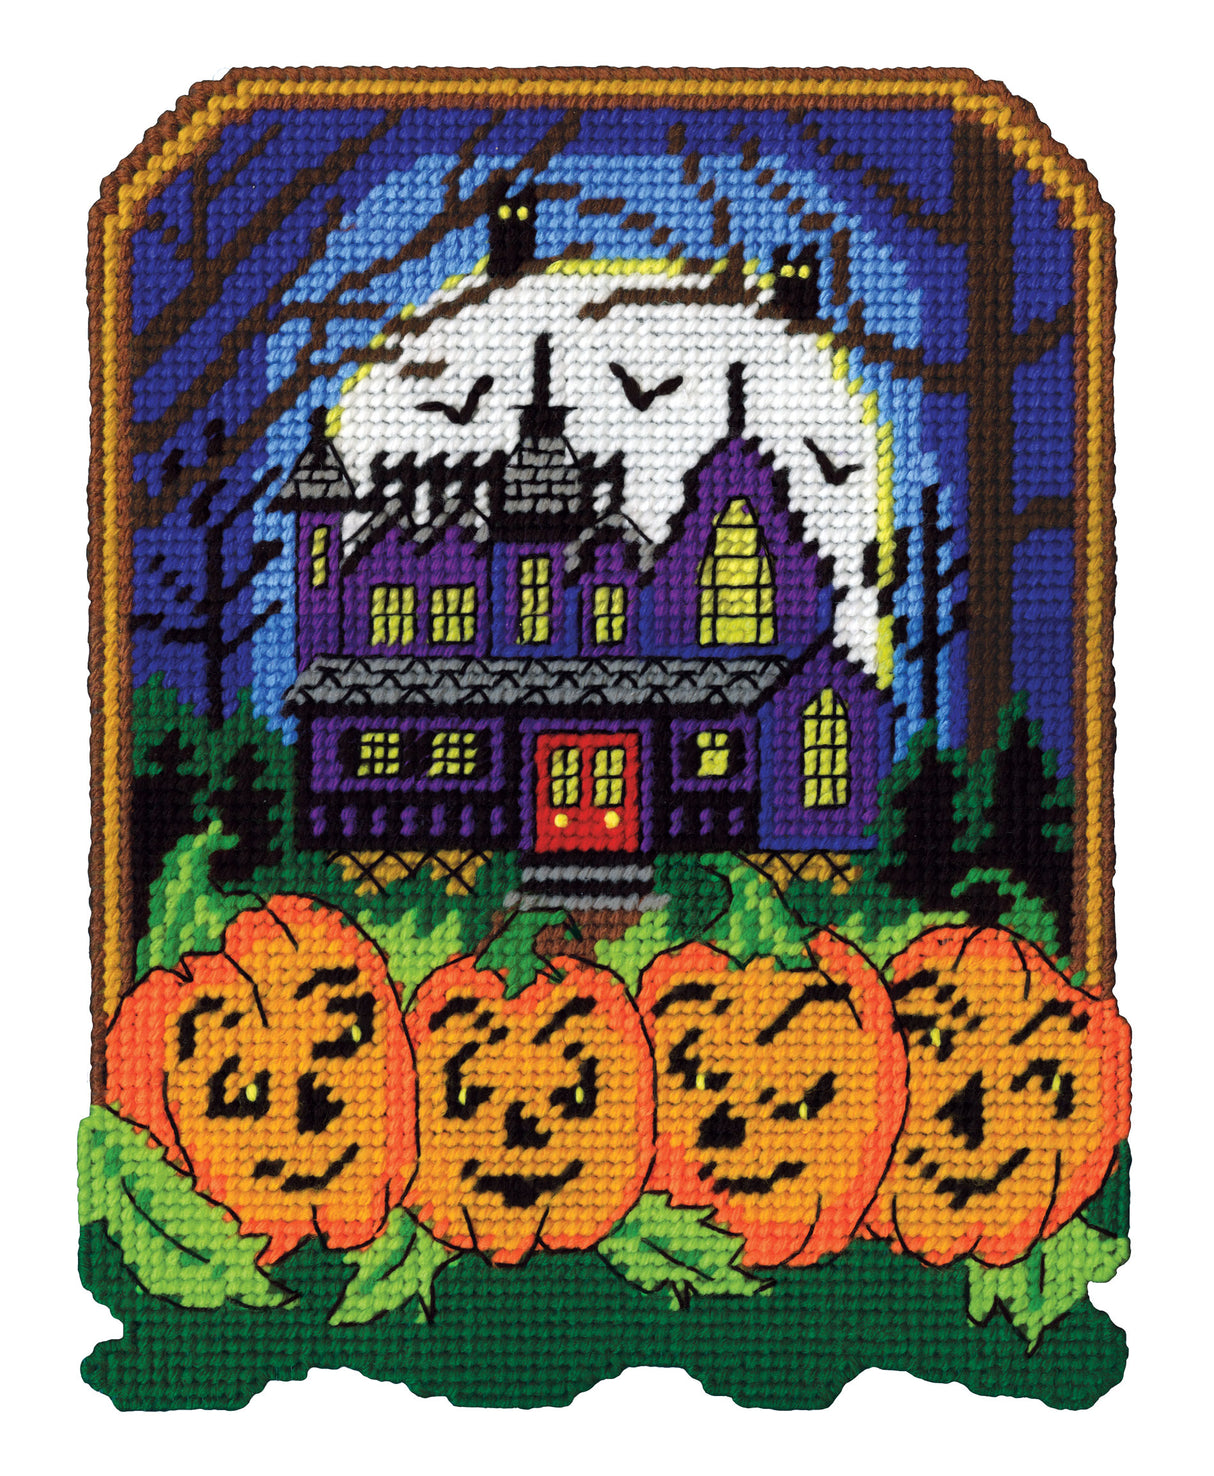 Haunted House Plastic Canvas Wall Hanging